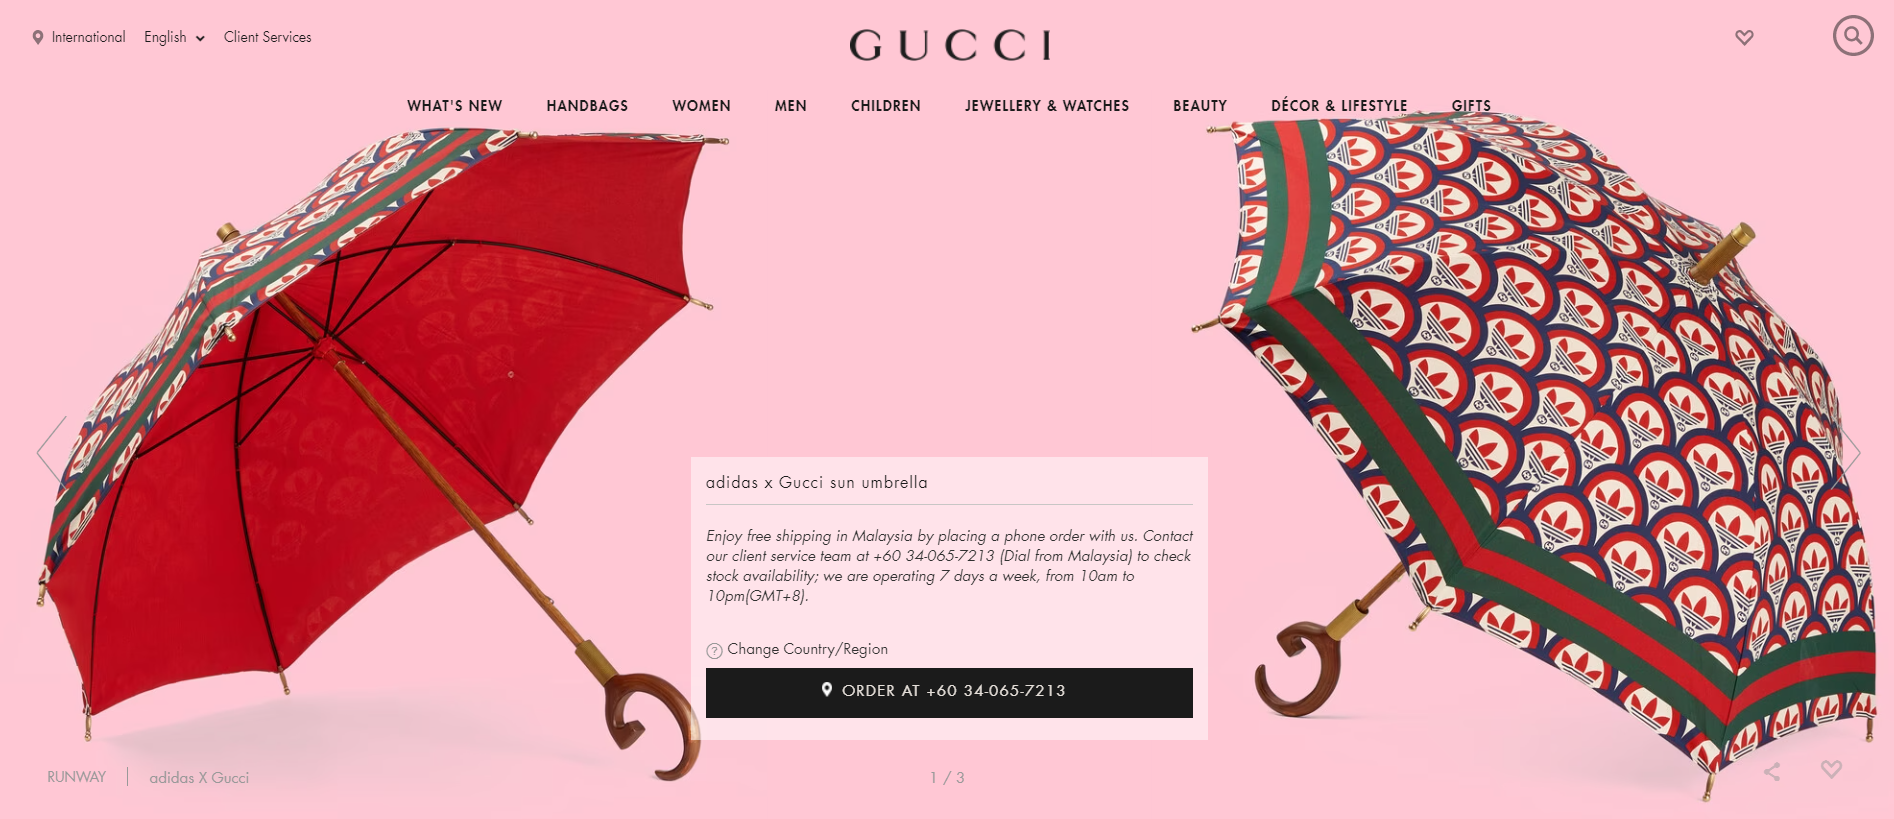 Turns out adidas x gucci's rm7,190 umbrella isn't waterproof. And netizens are calling them out for it | weirdkaya